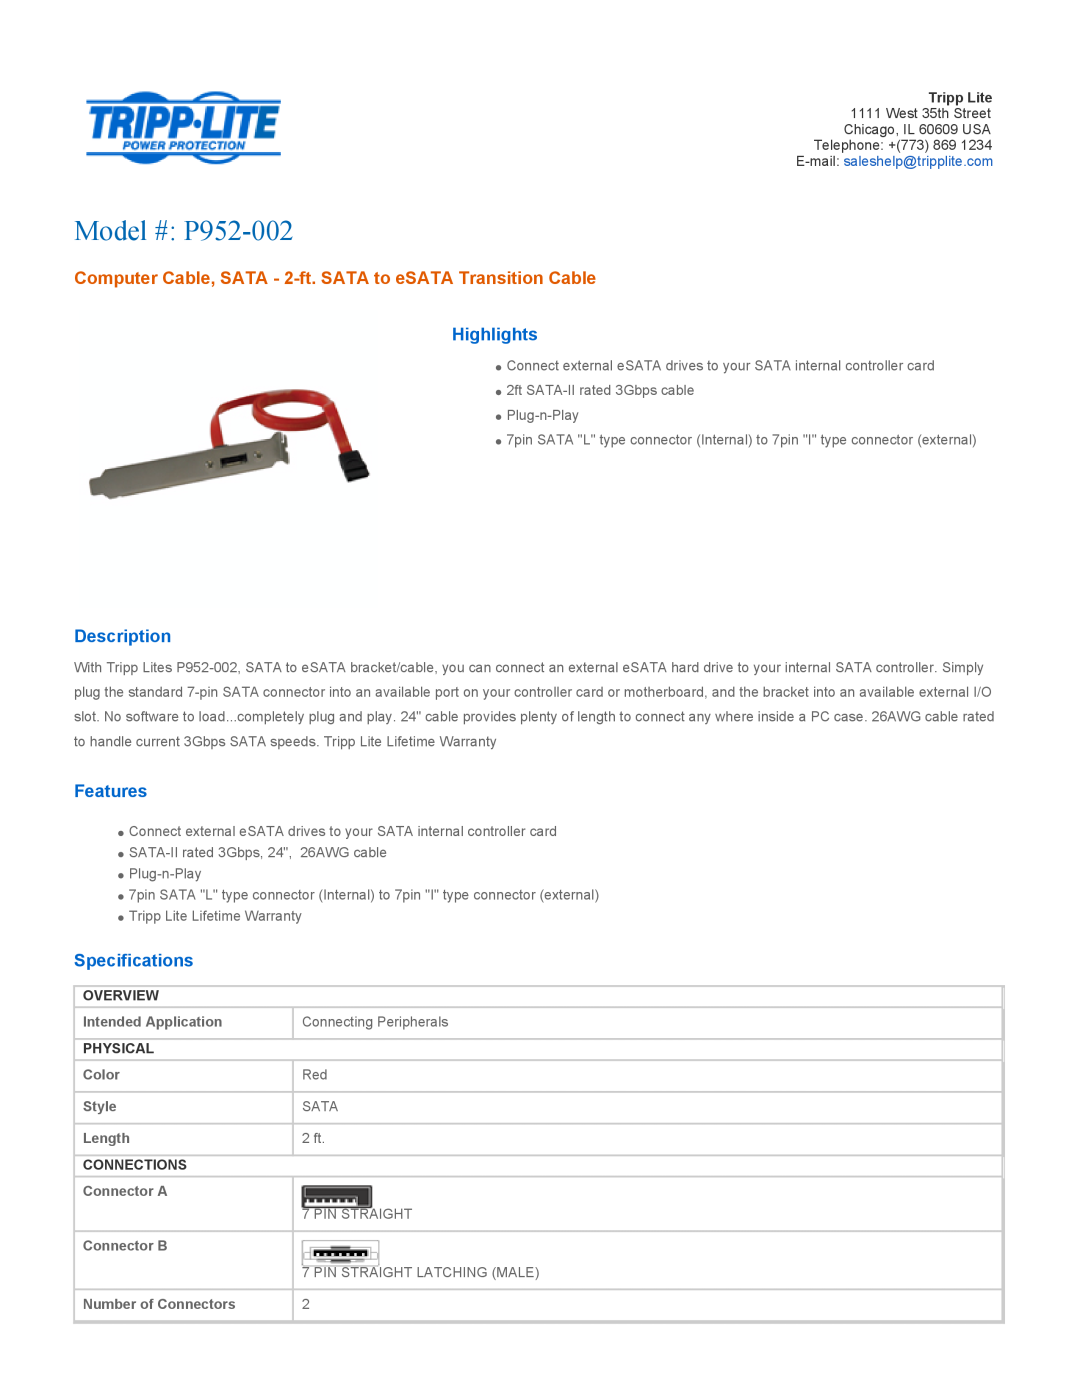 Tripp Lite specifications Model # P952-002, Computer Cable, SATA - 2-ft. SATA to eSATA Transition Cable, Highlights 